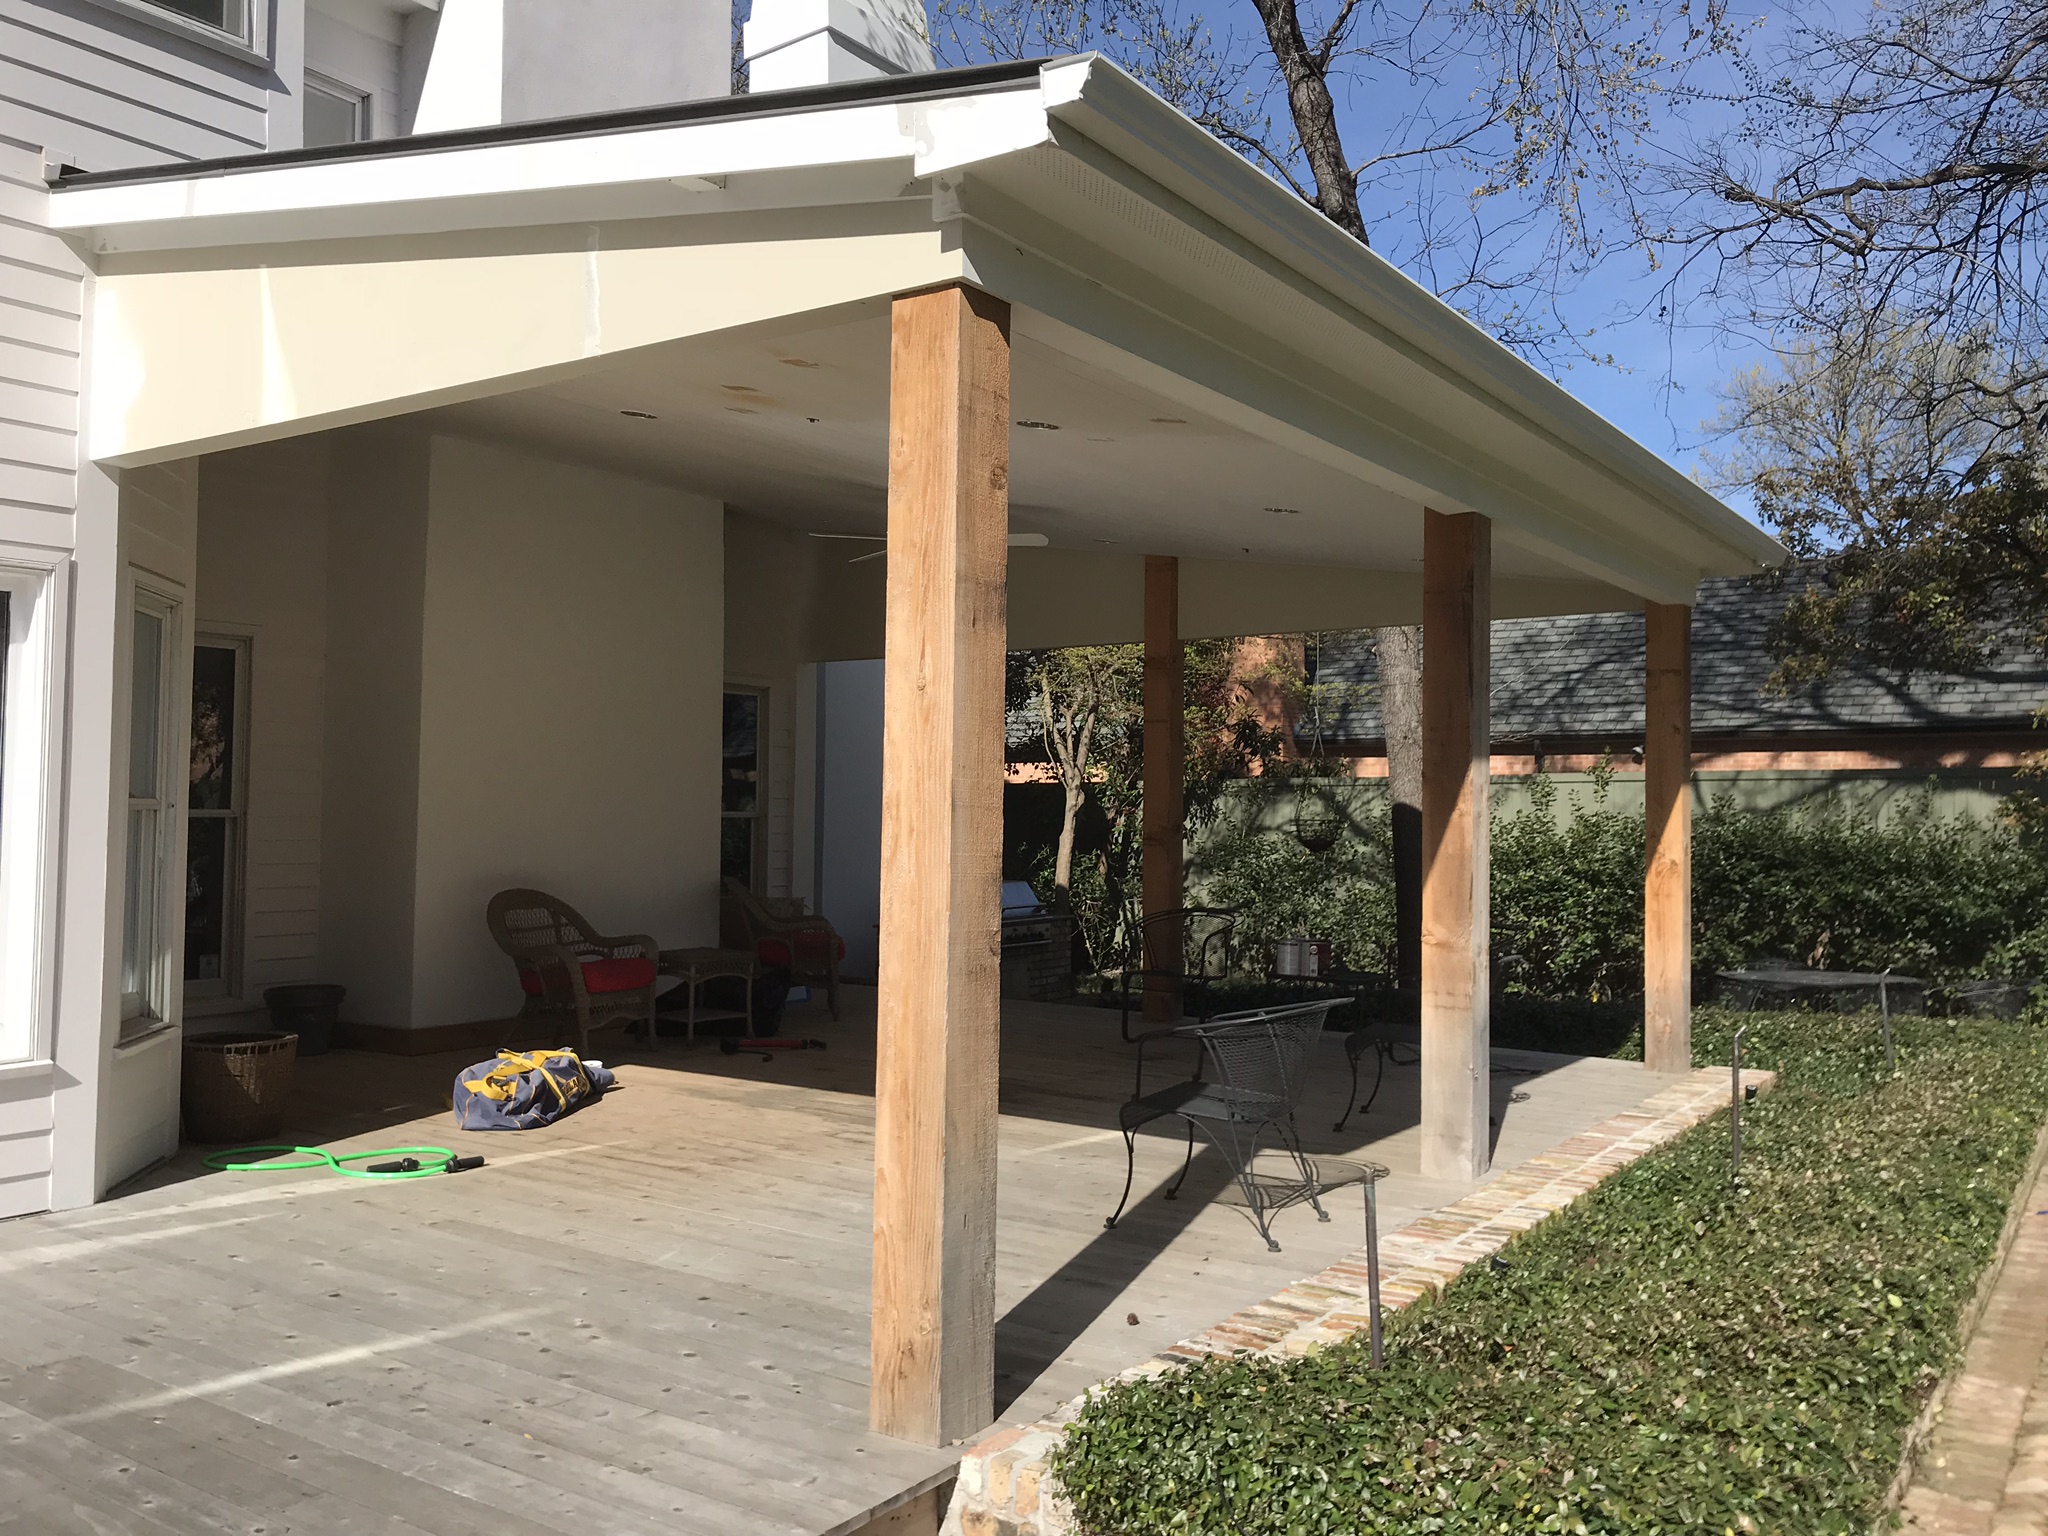 Home in North Texas with large backyard patio area that is covered with patio roof built by Jenkins Roofing.